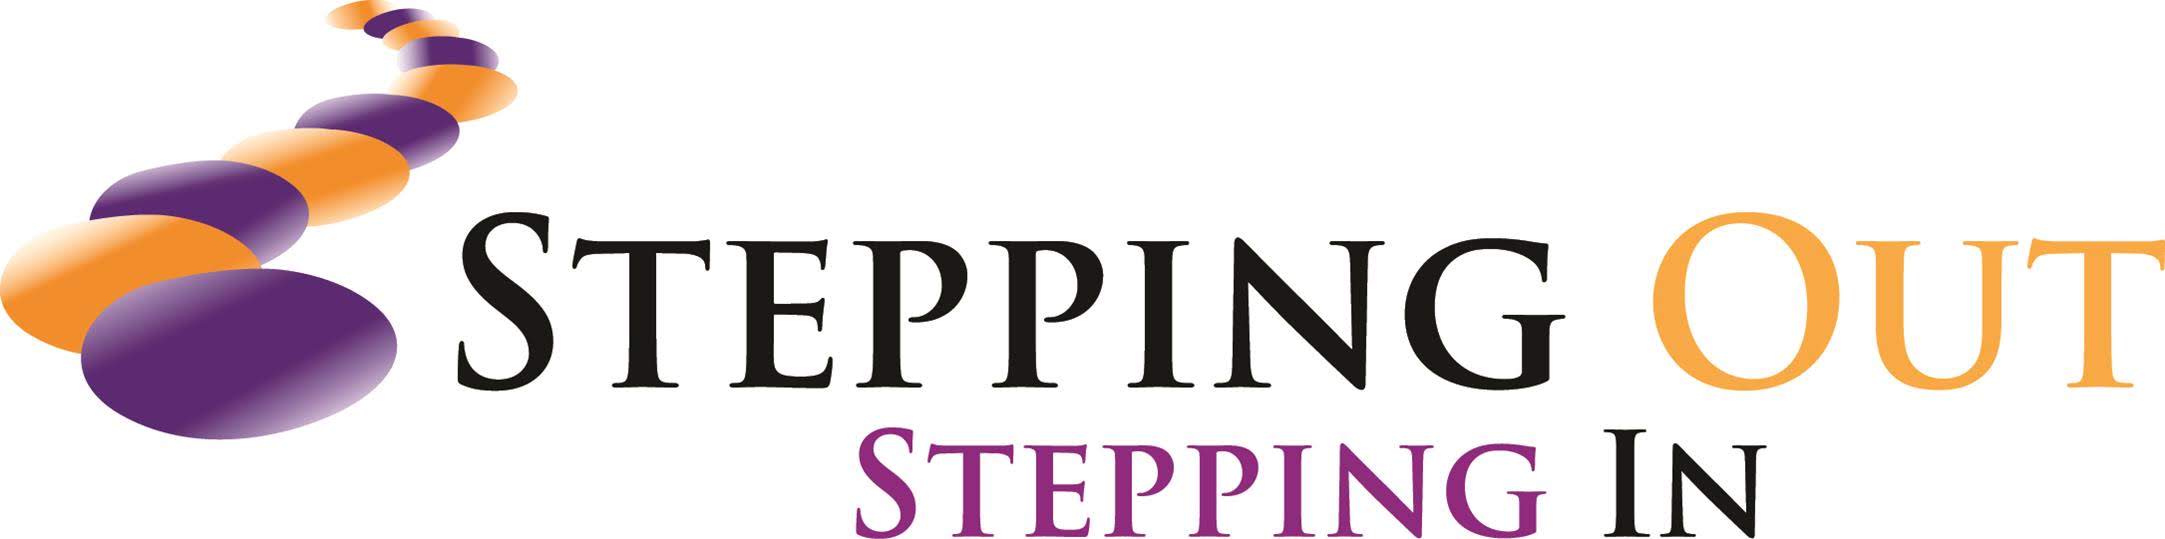 Steppin Out Stepping In Logo